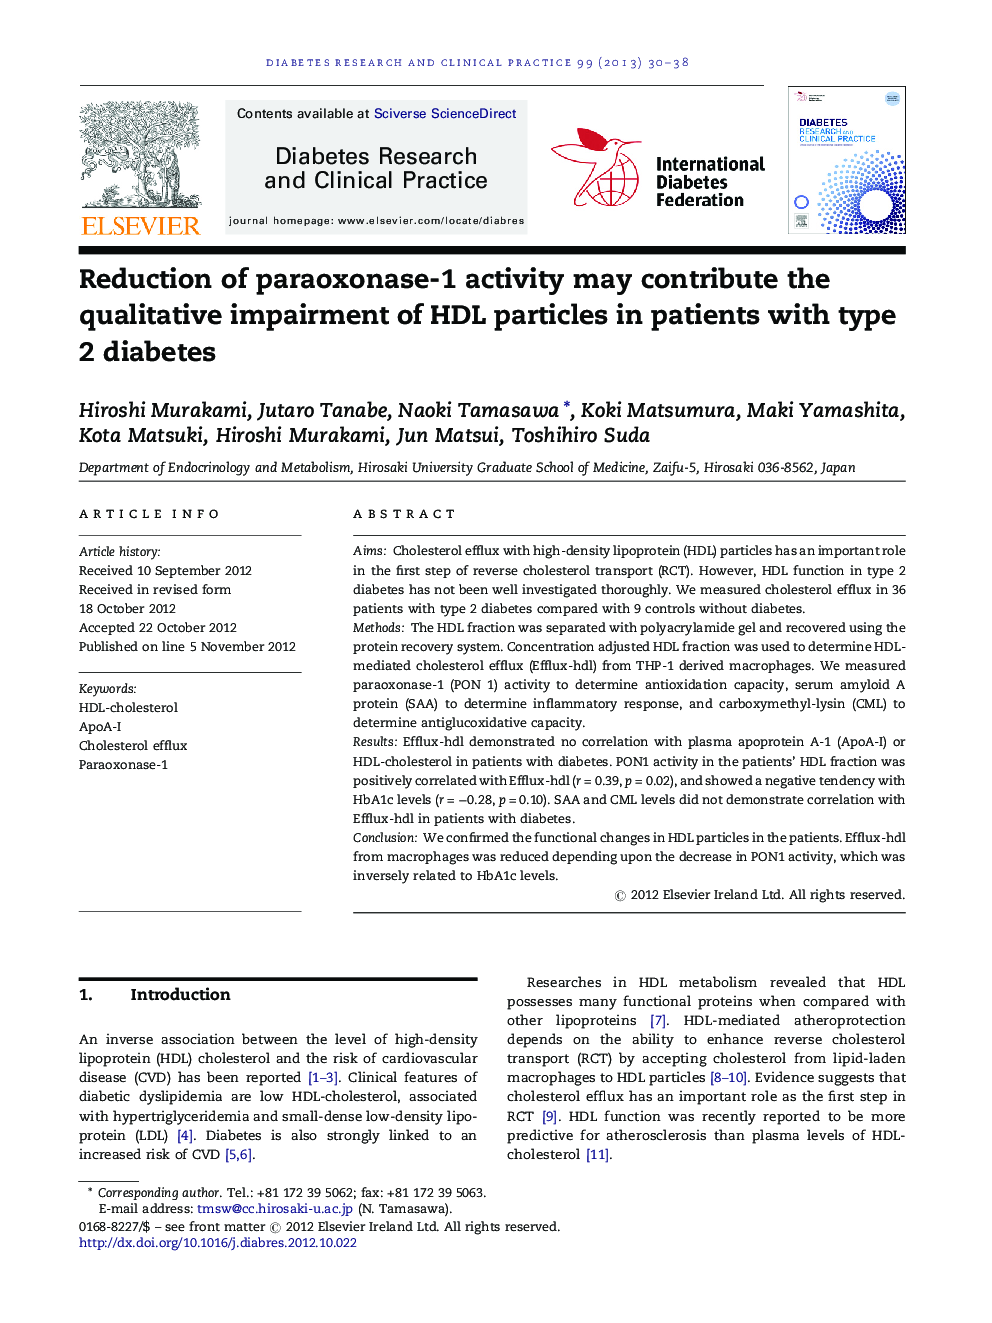 Reduction of paraoxonase-1 activity may contribute the qualitative impairment of HDL particles in patients with type 2 diabetes